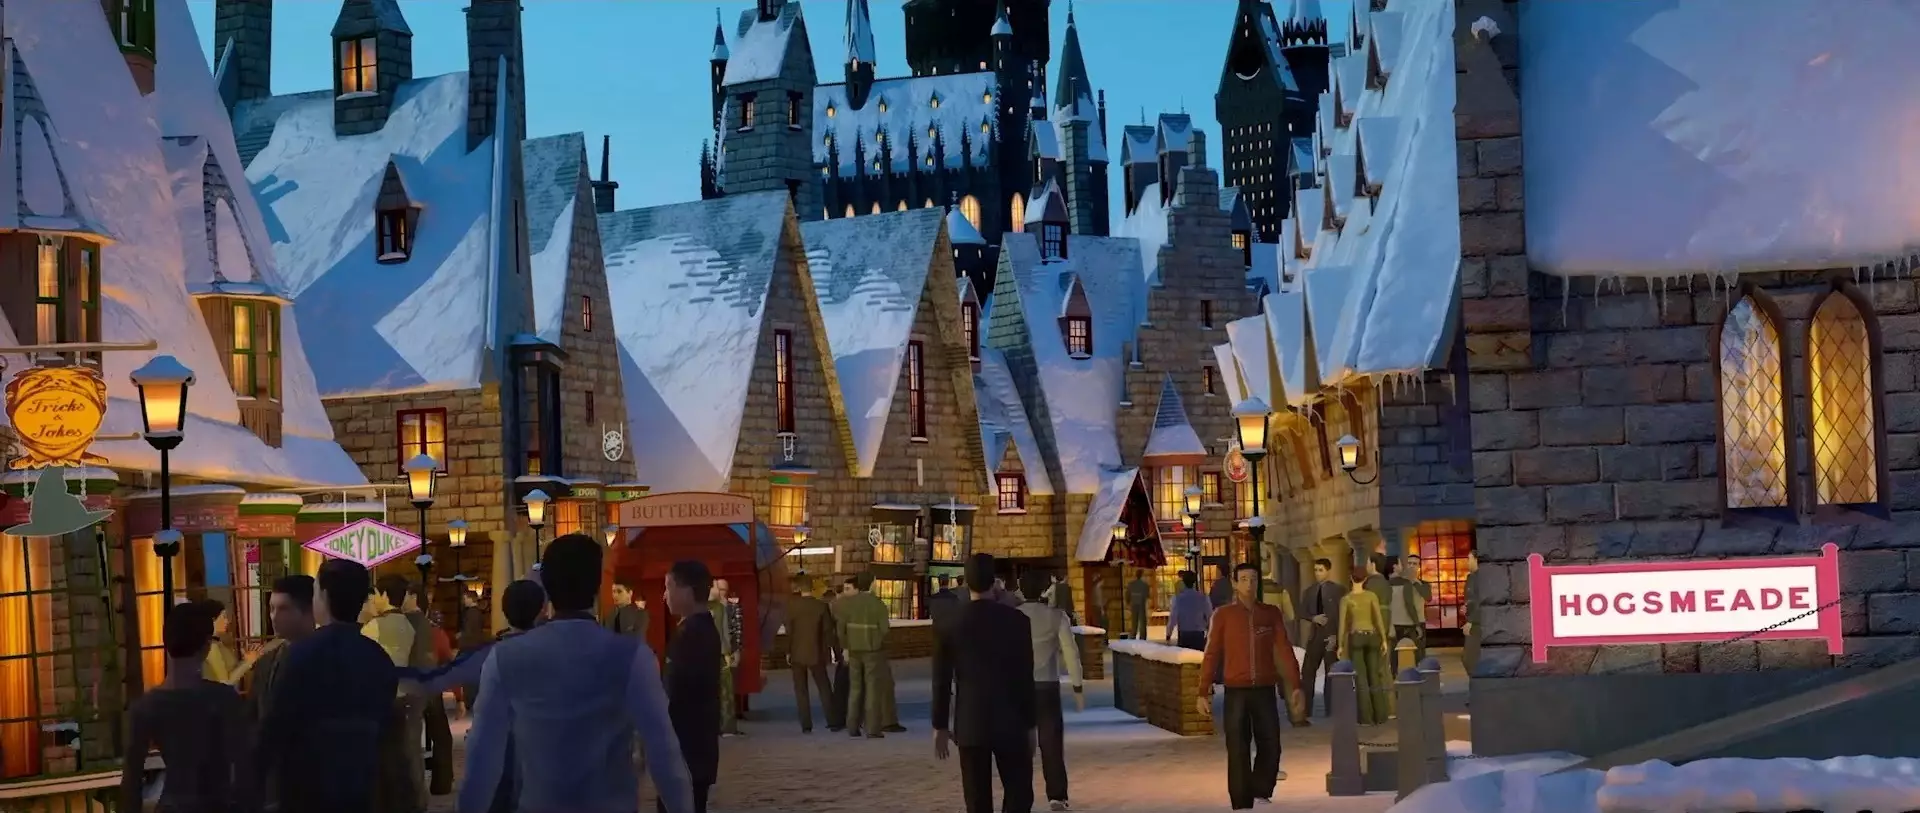 An artist concept shows snow-topped roofs and a Hogsmeade (